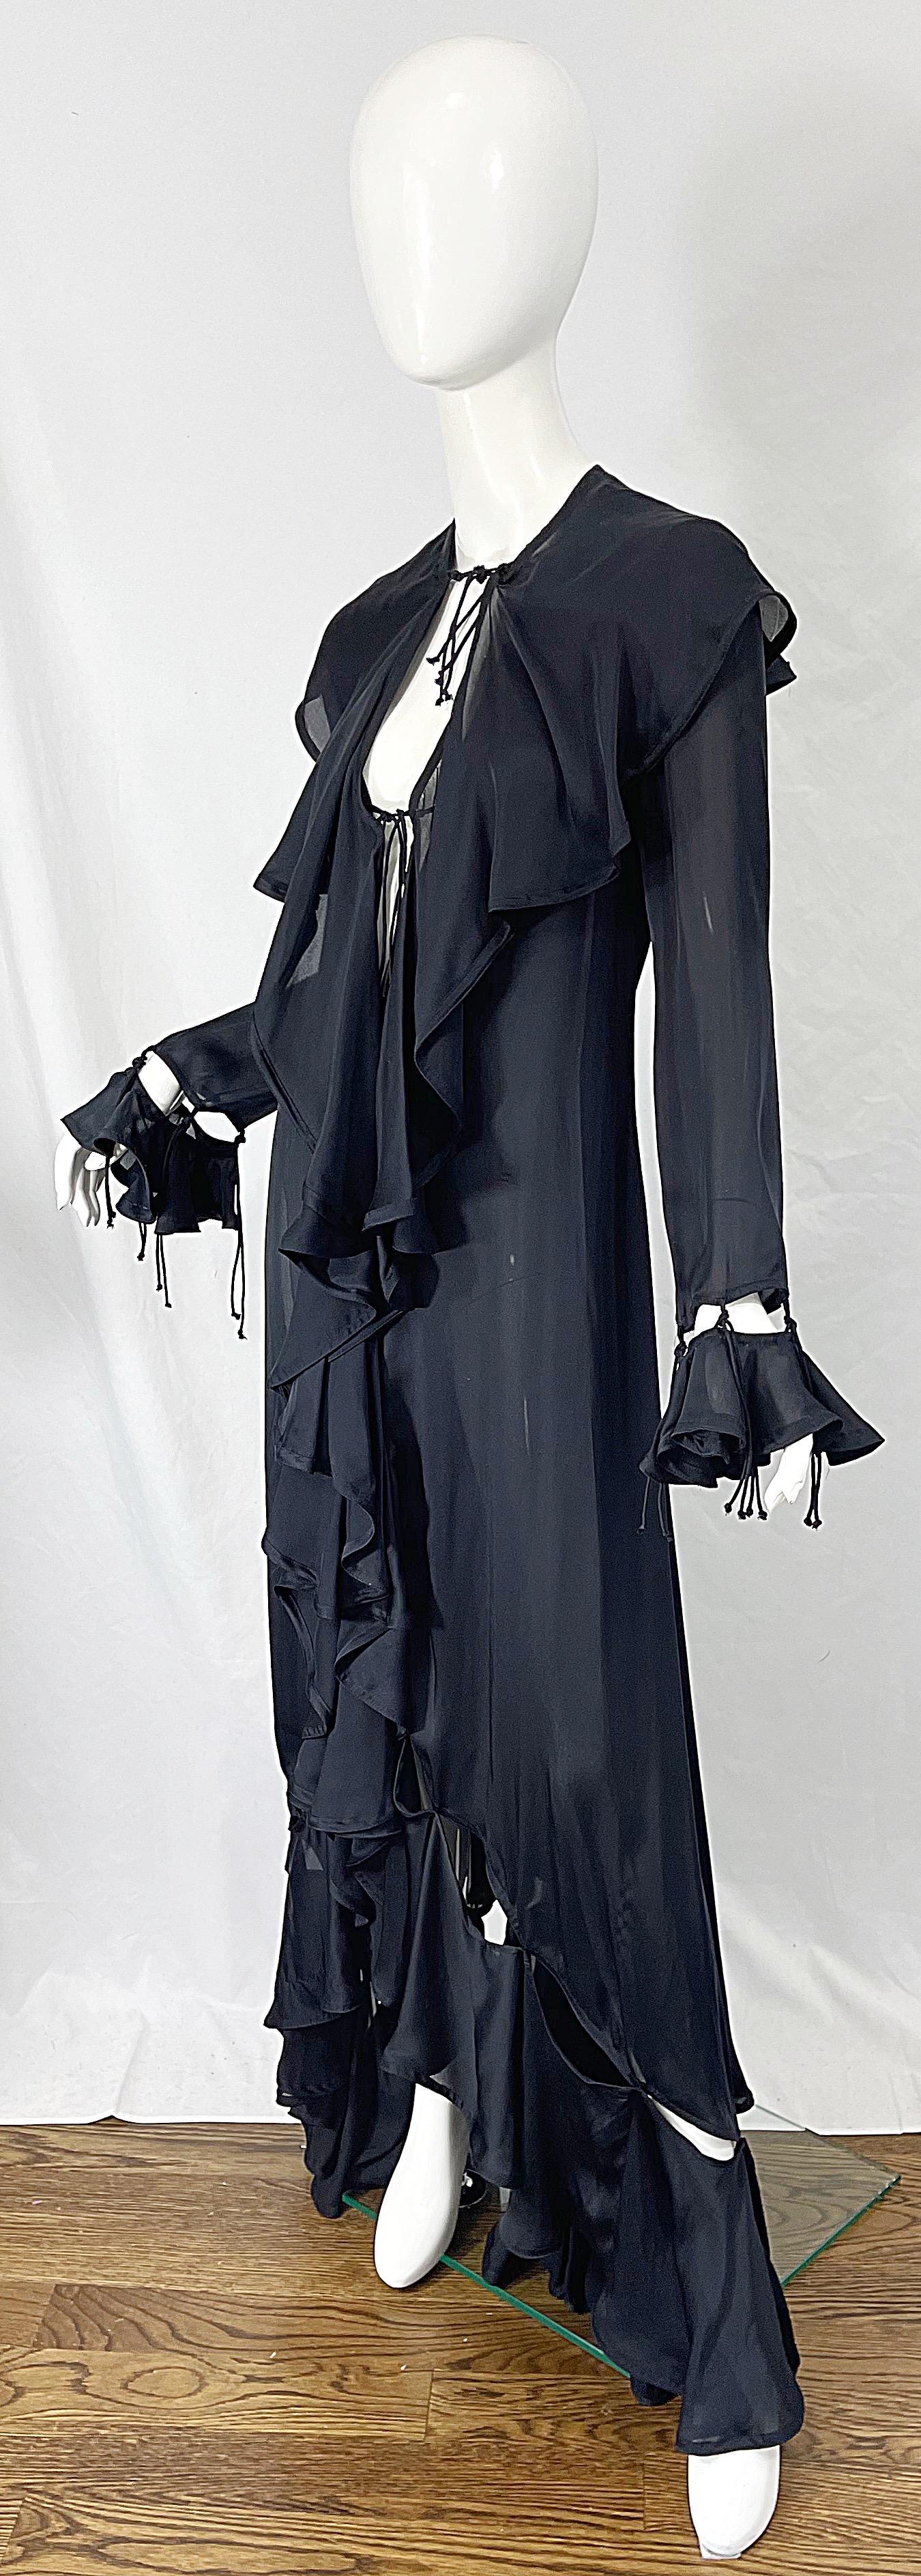 Yves Saint Laurent by Tom Ford Fall 2003 Runway Black Silk Chiffon Gown Size 38 In Excellent Condition For Sale In San Diego, CA